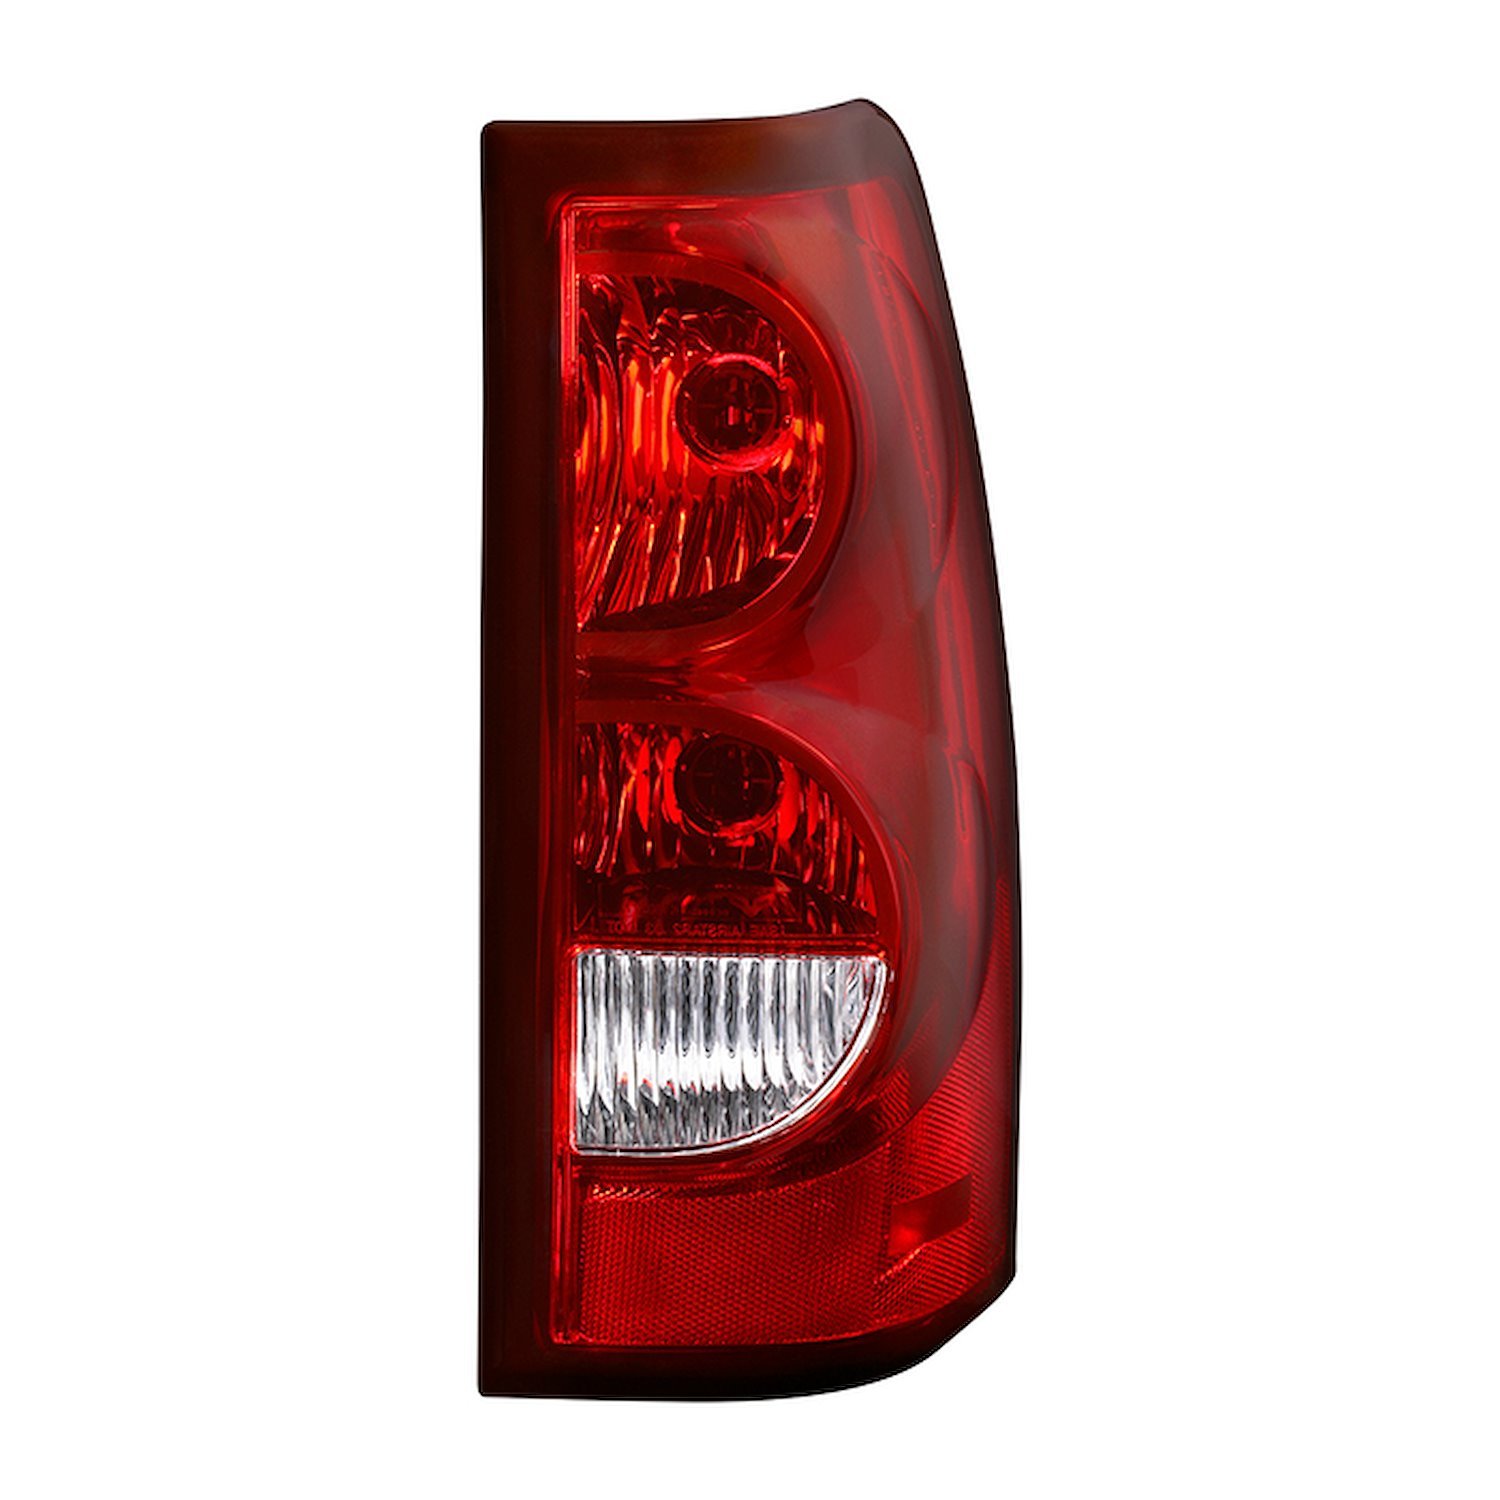 xTune OEM Style Tail Lights 2003-2006 Chevy Silverado